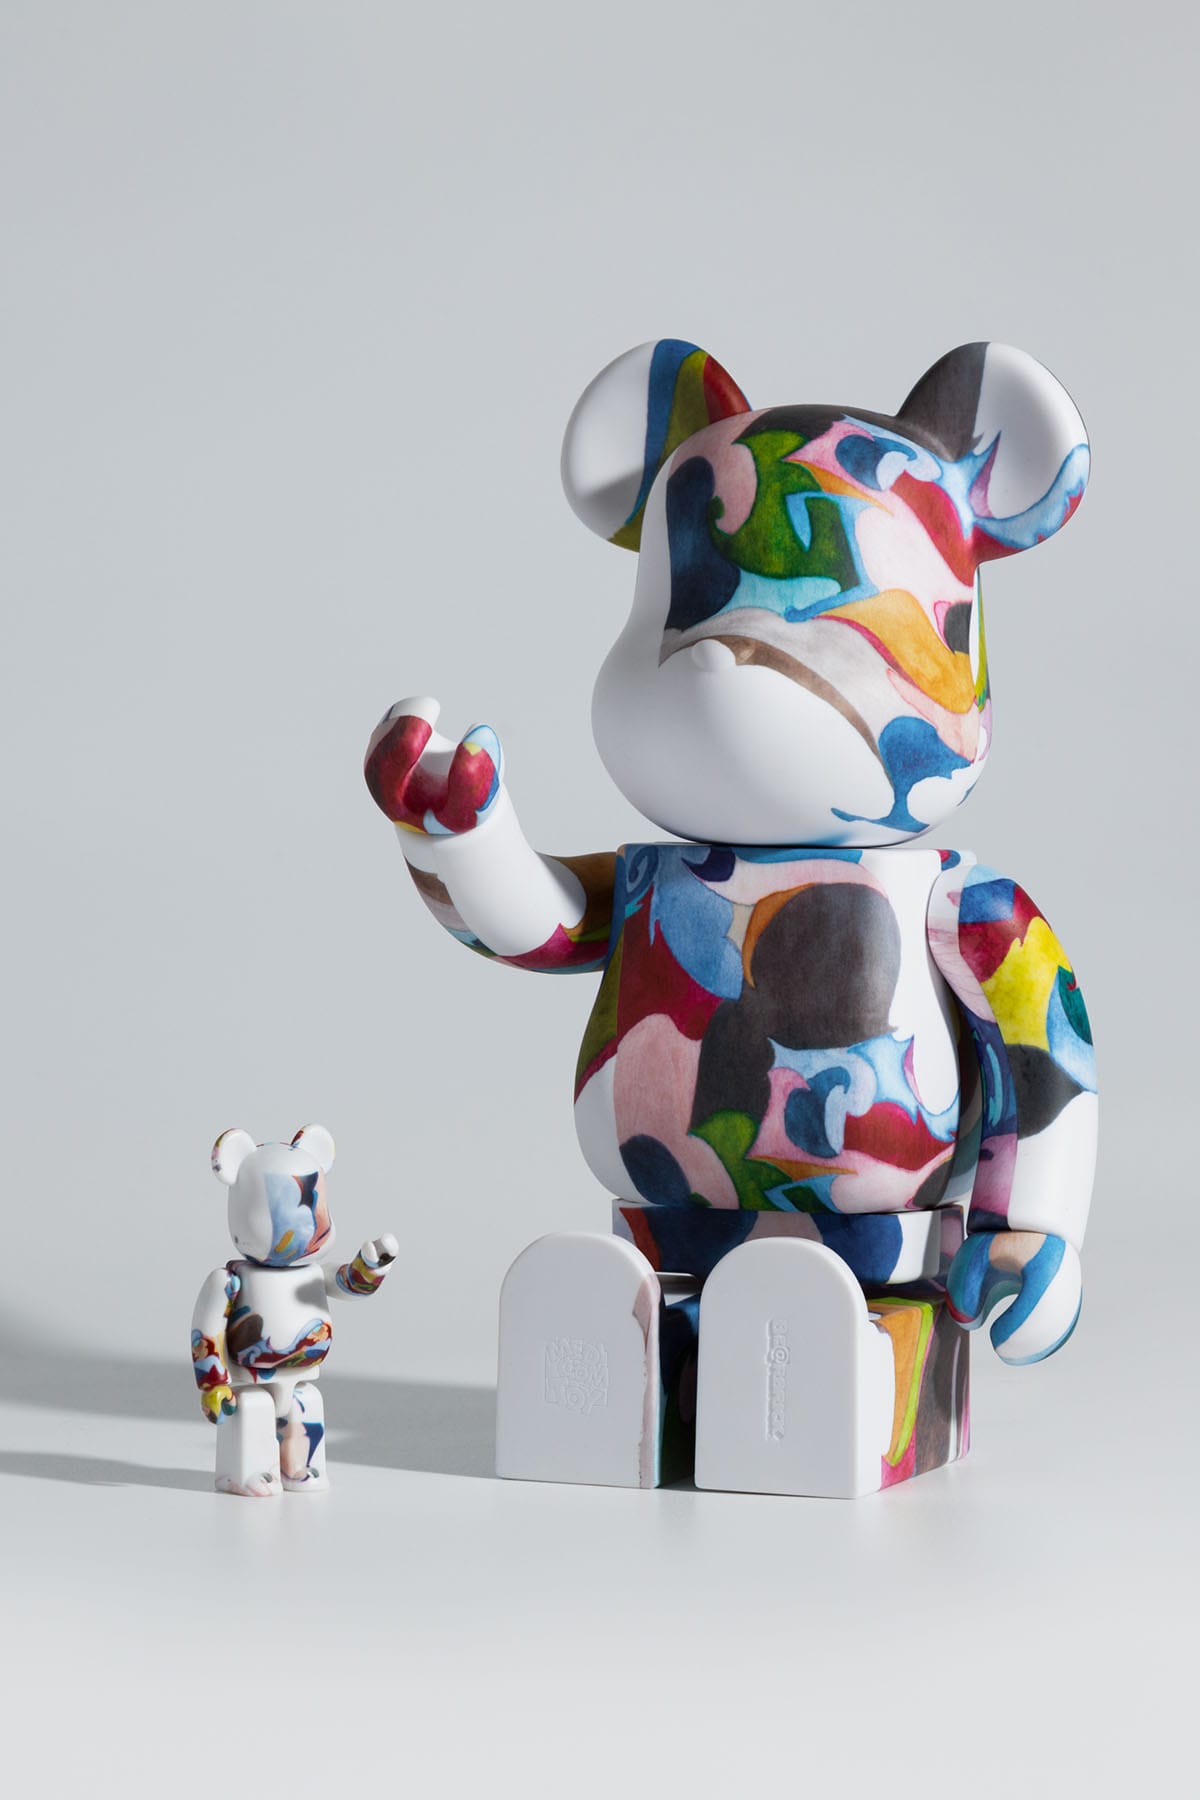 BE@RBRICK NUJABES "FIRST COLLECTION